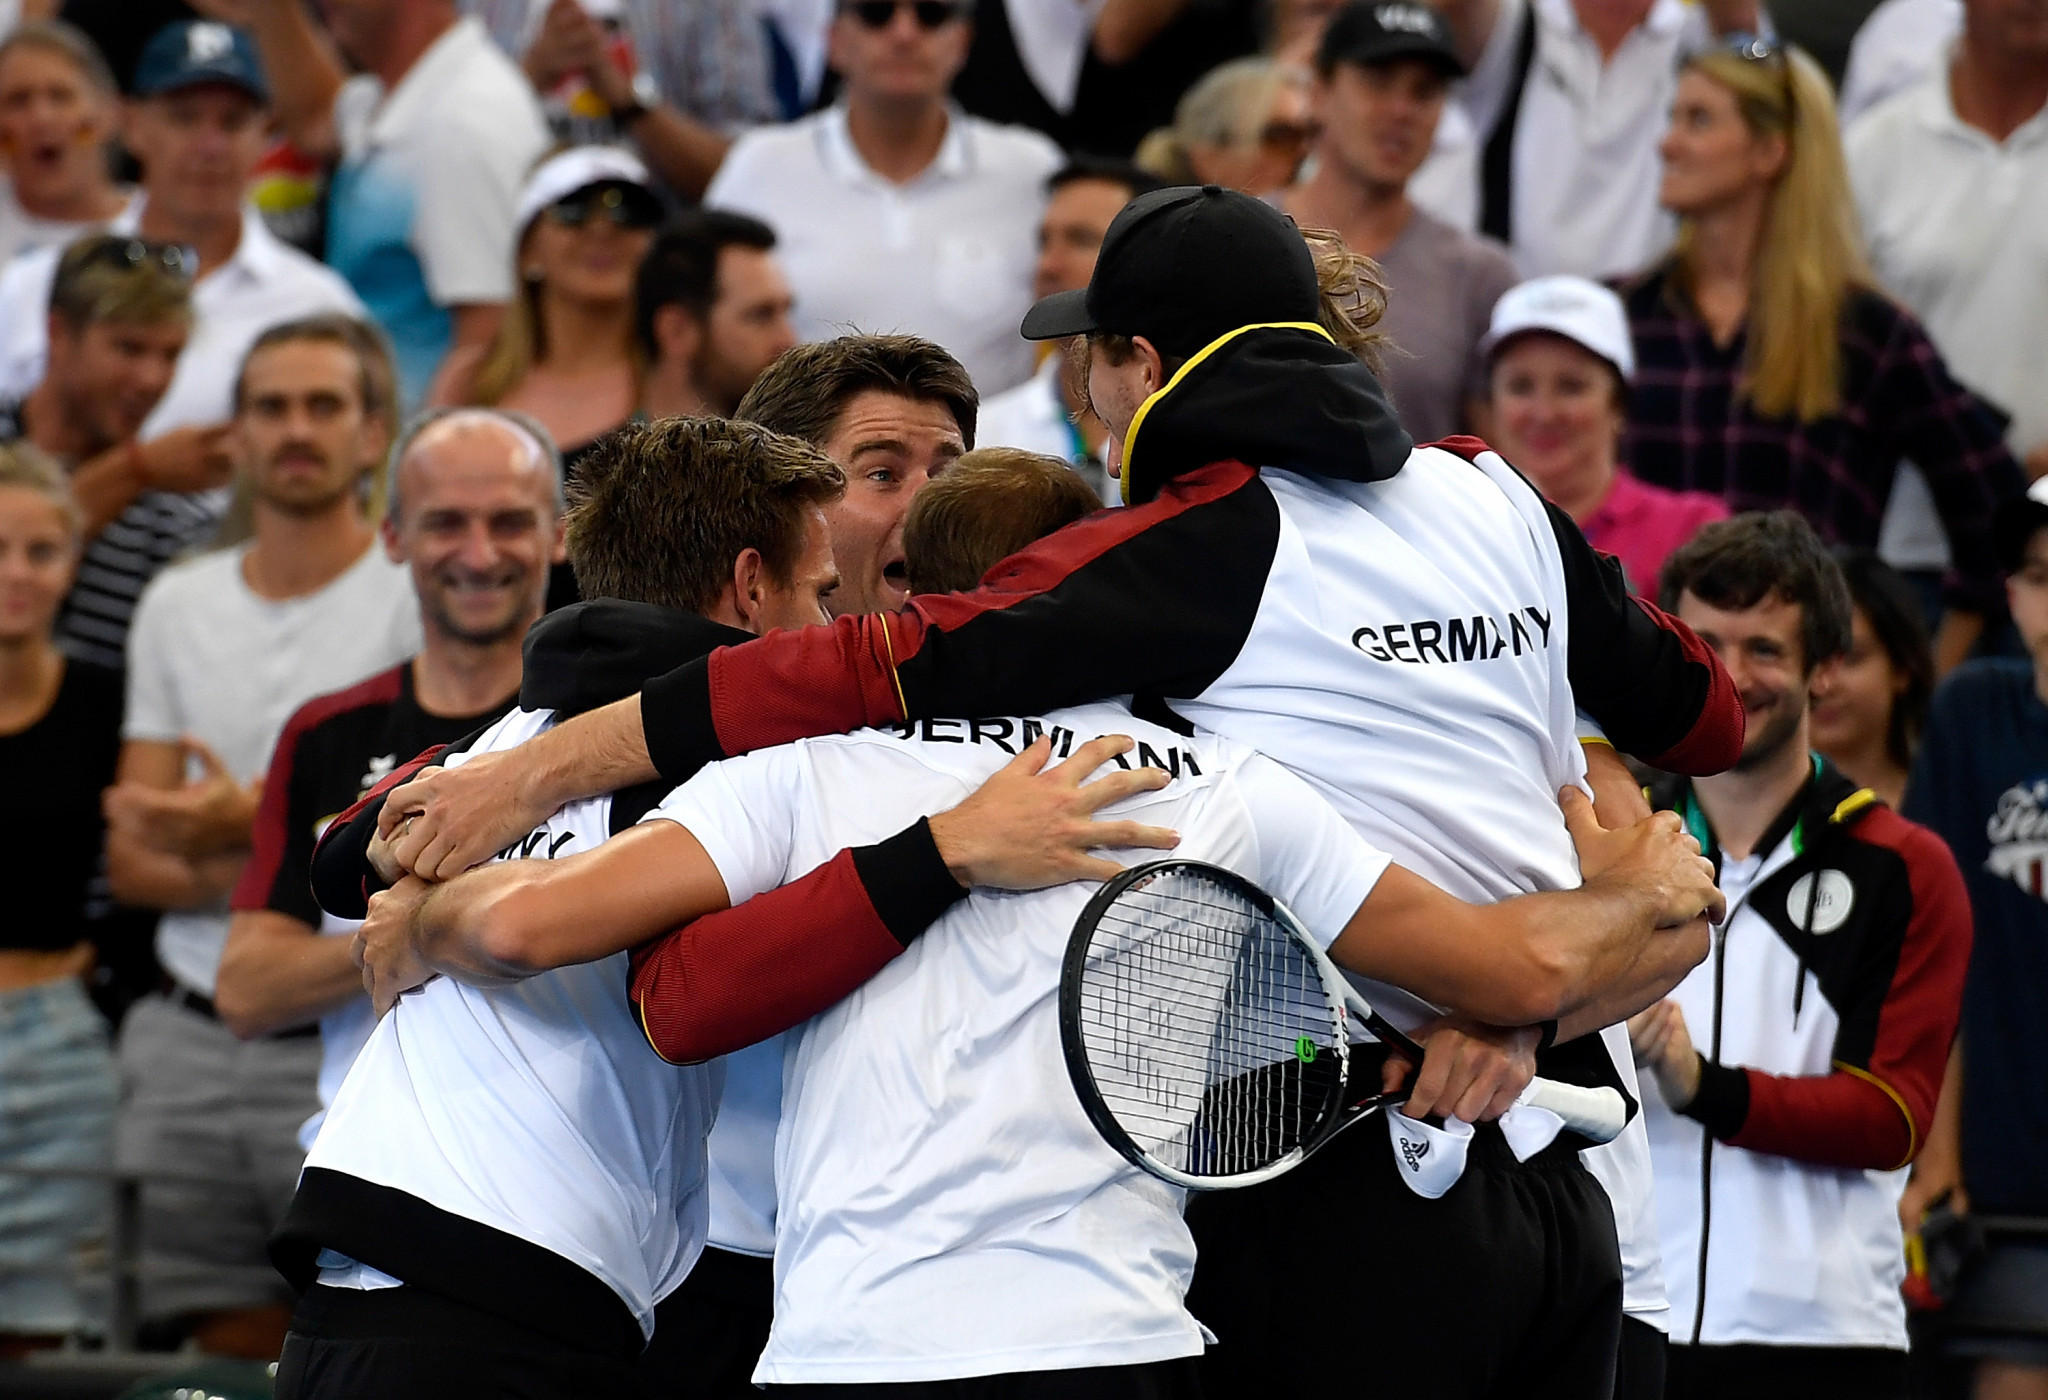 Germany last won the Davis Cup in 1993 ©Getty Images